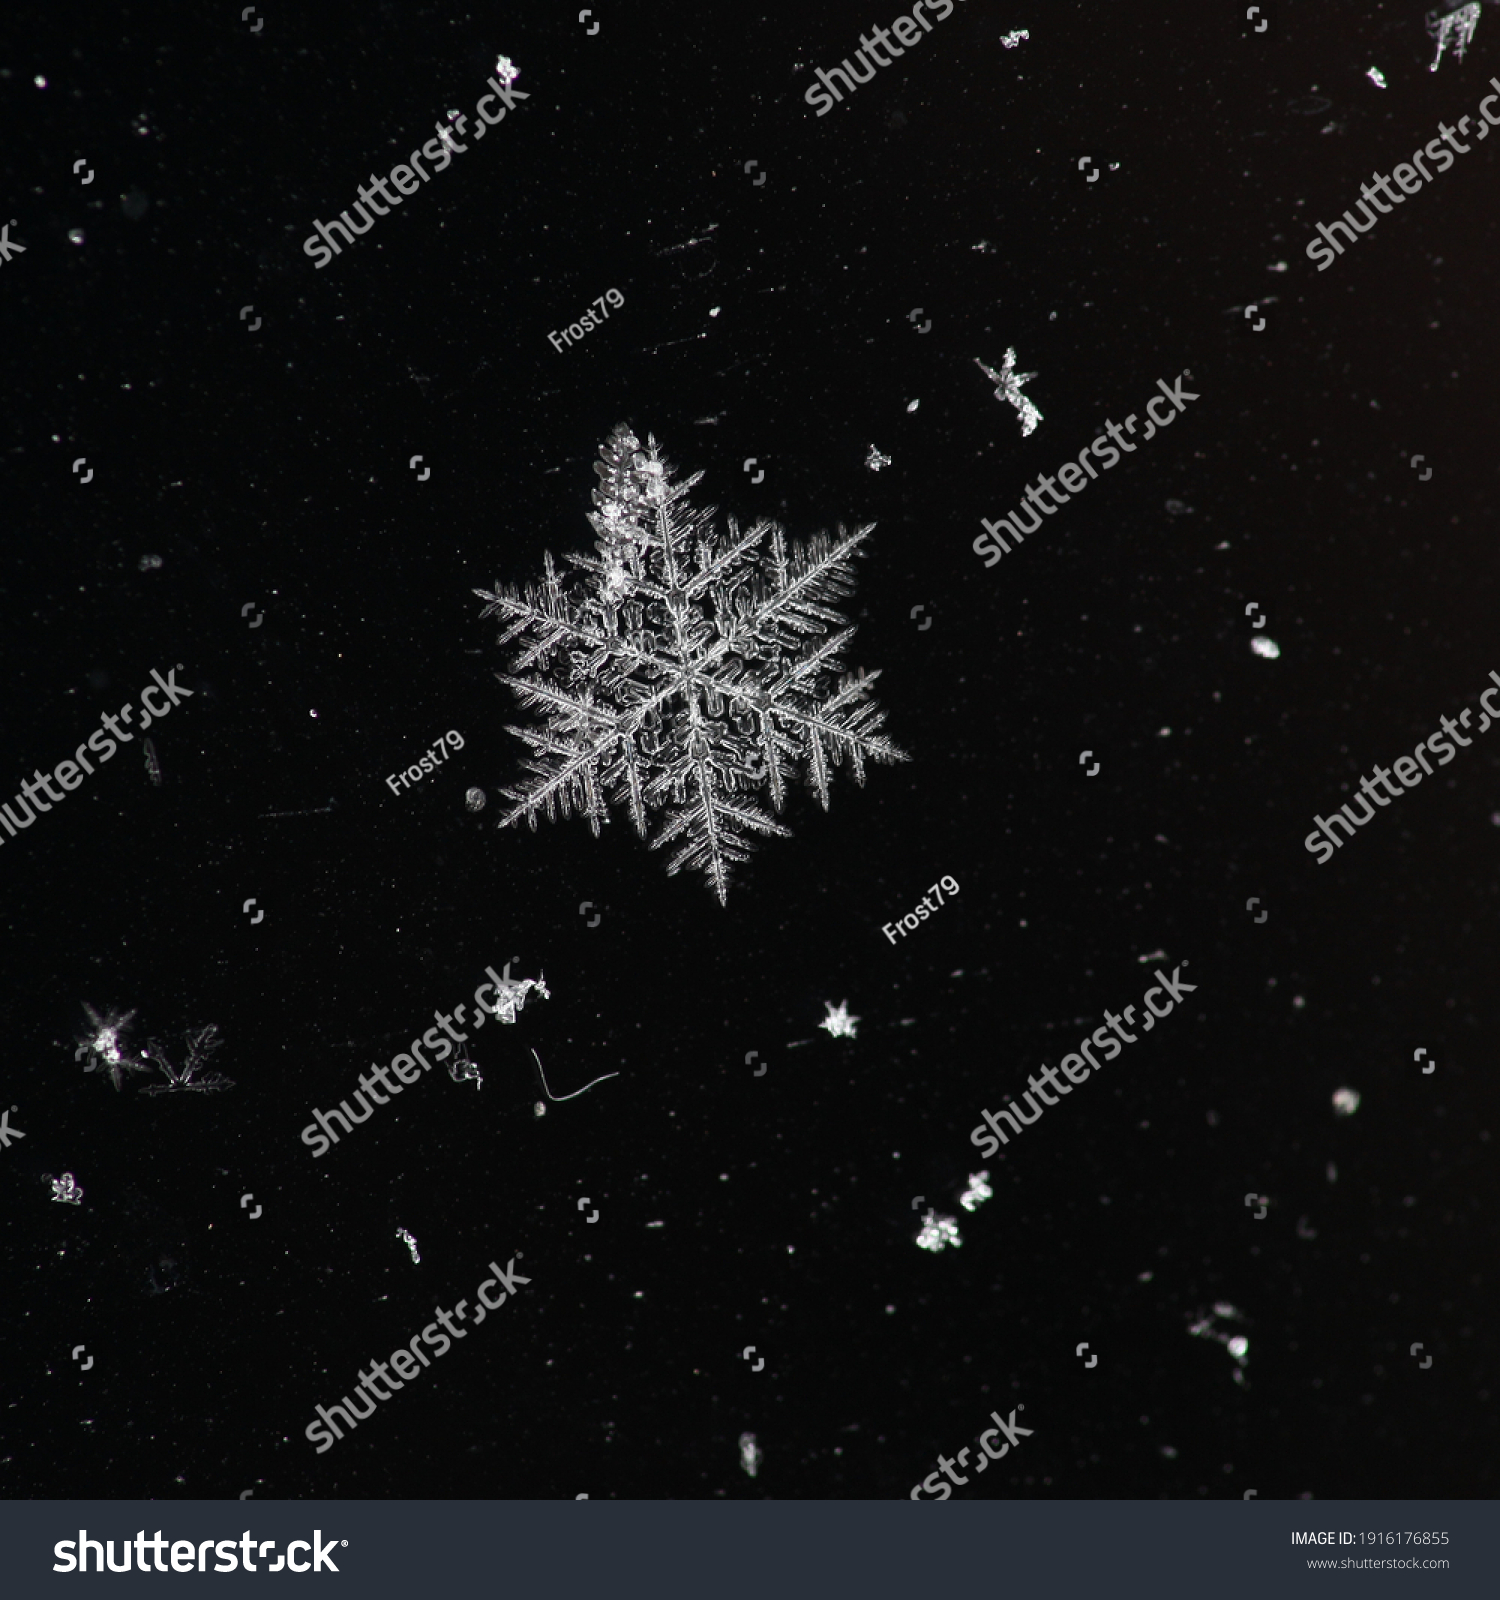 Winter snowflakes magnified. Snowflakes on a dark background. #1916176855